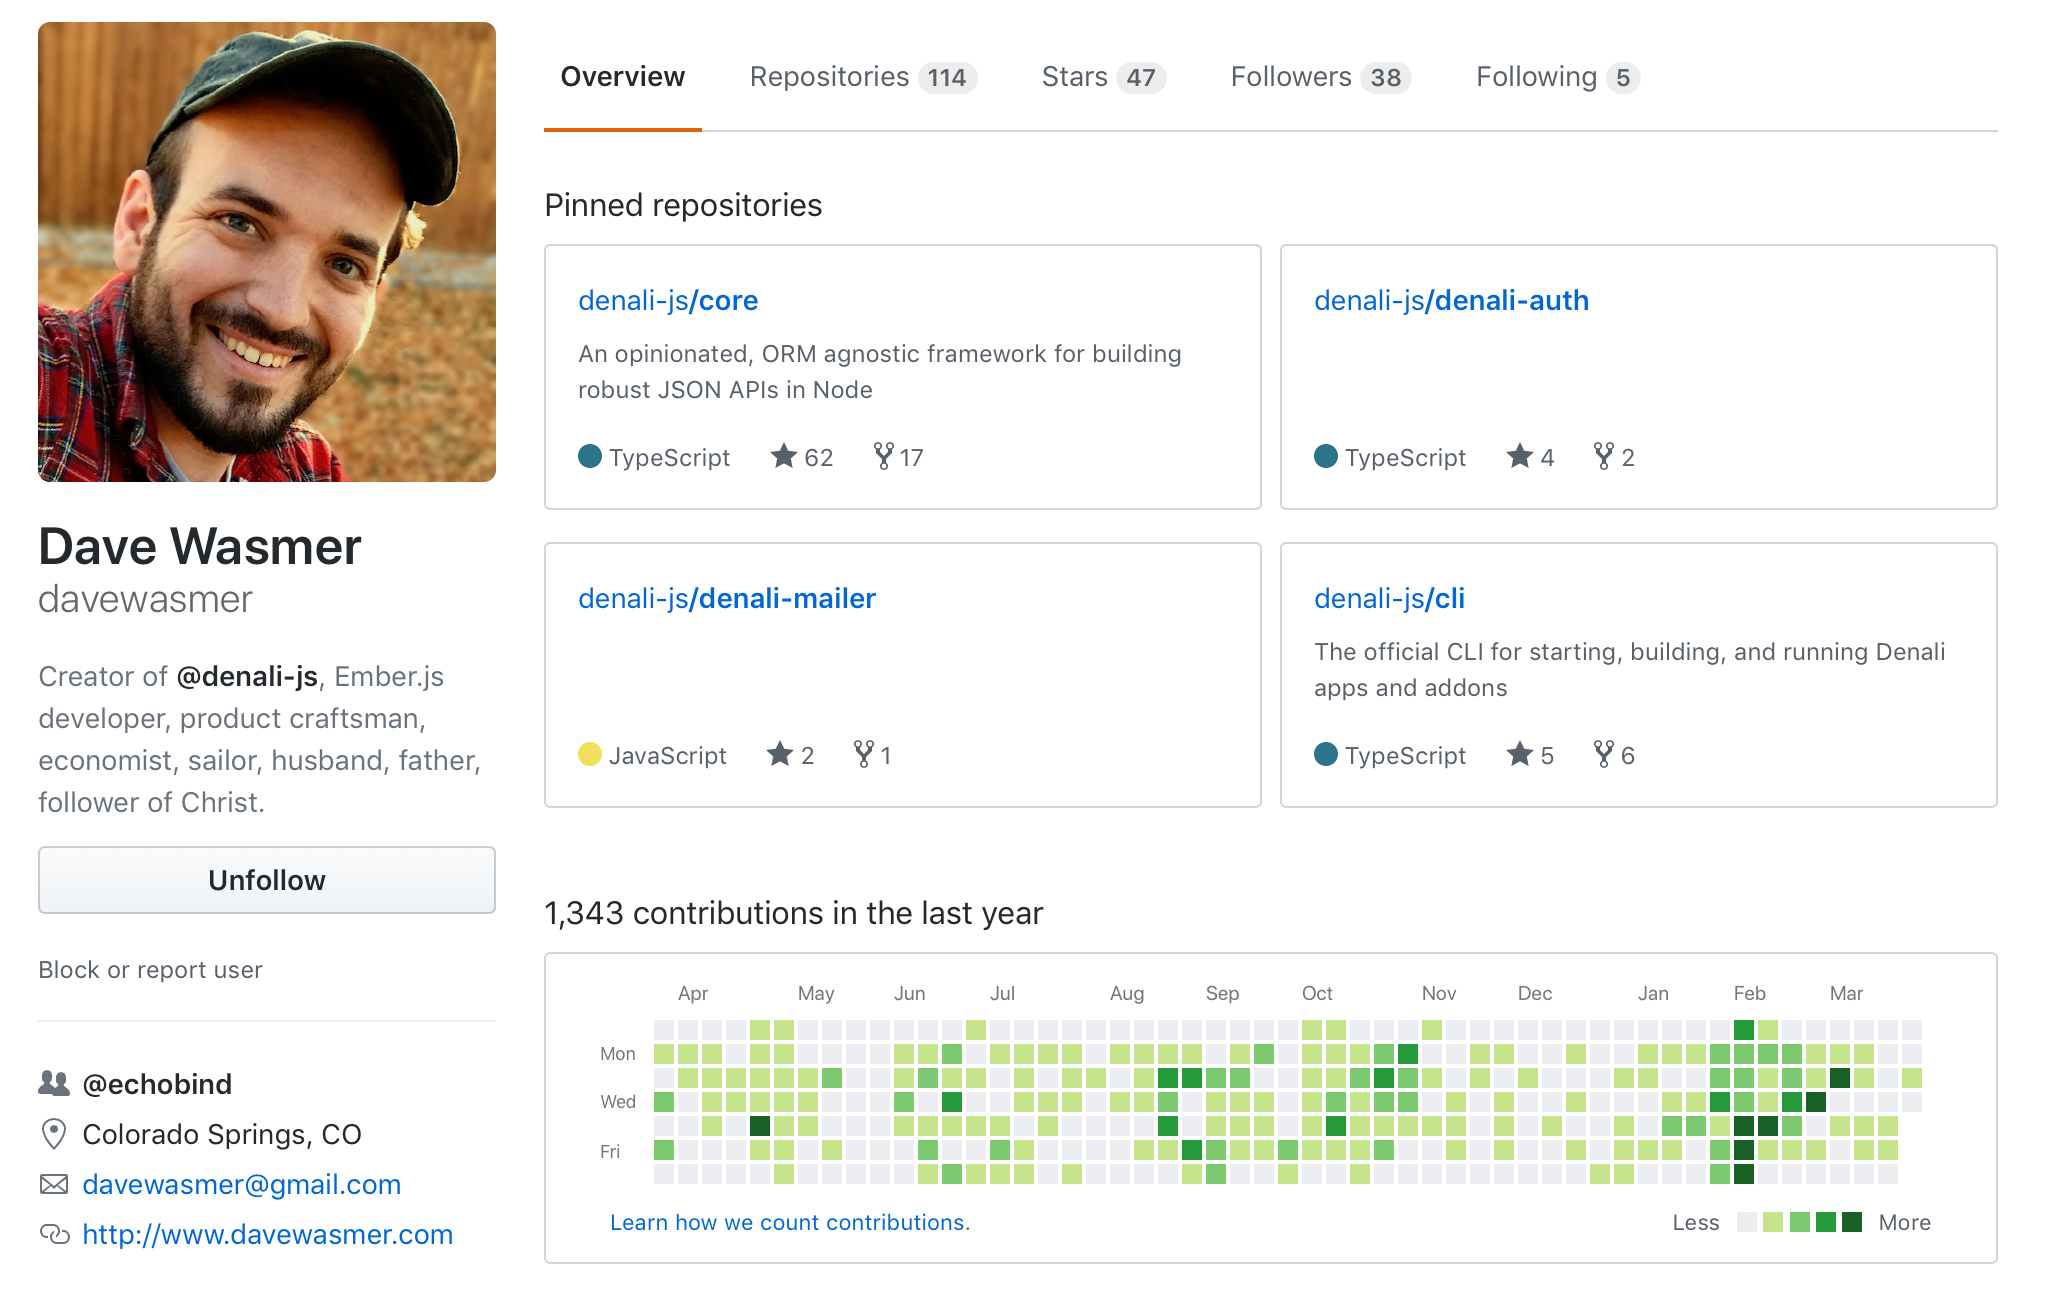 How to Get Your GitHub Profile Ready For Job Applications